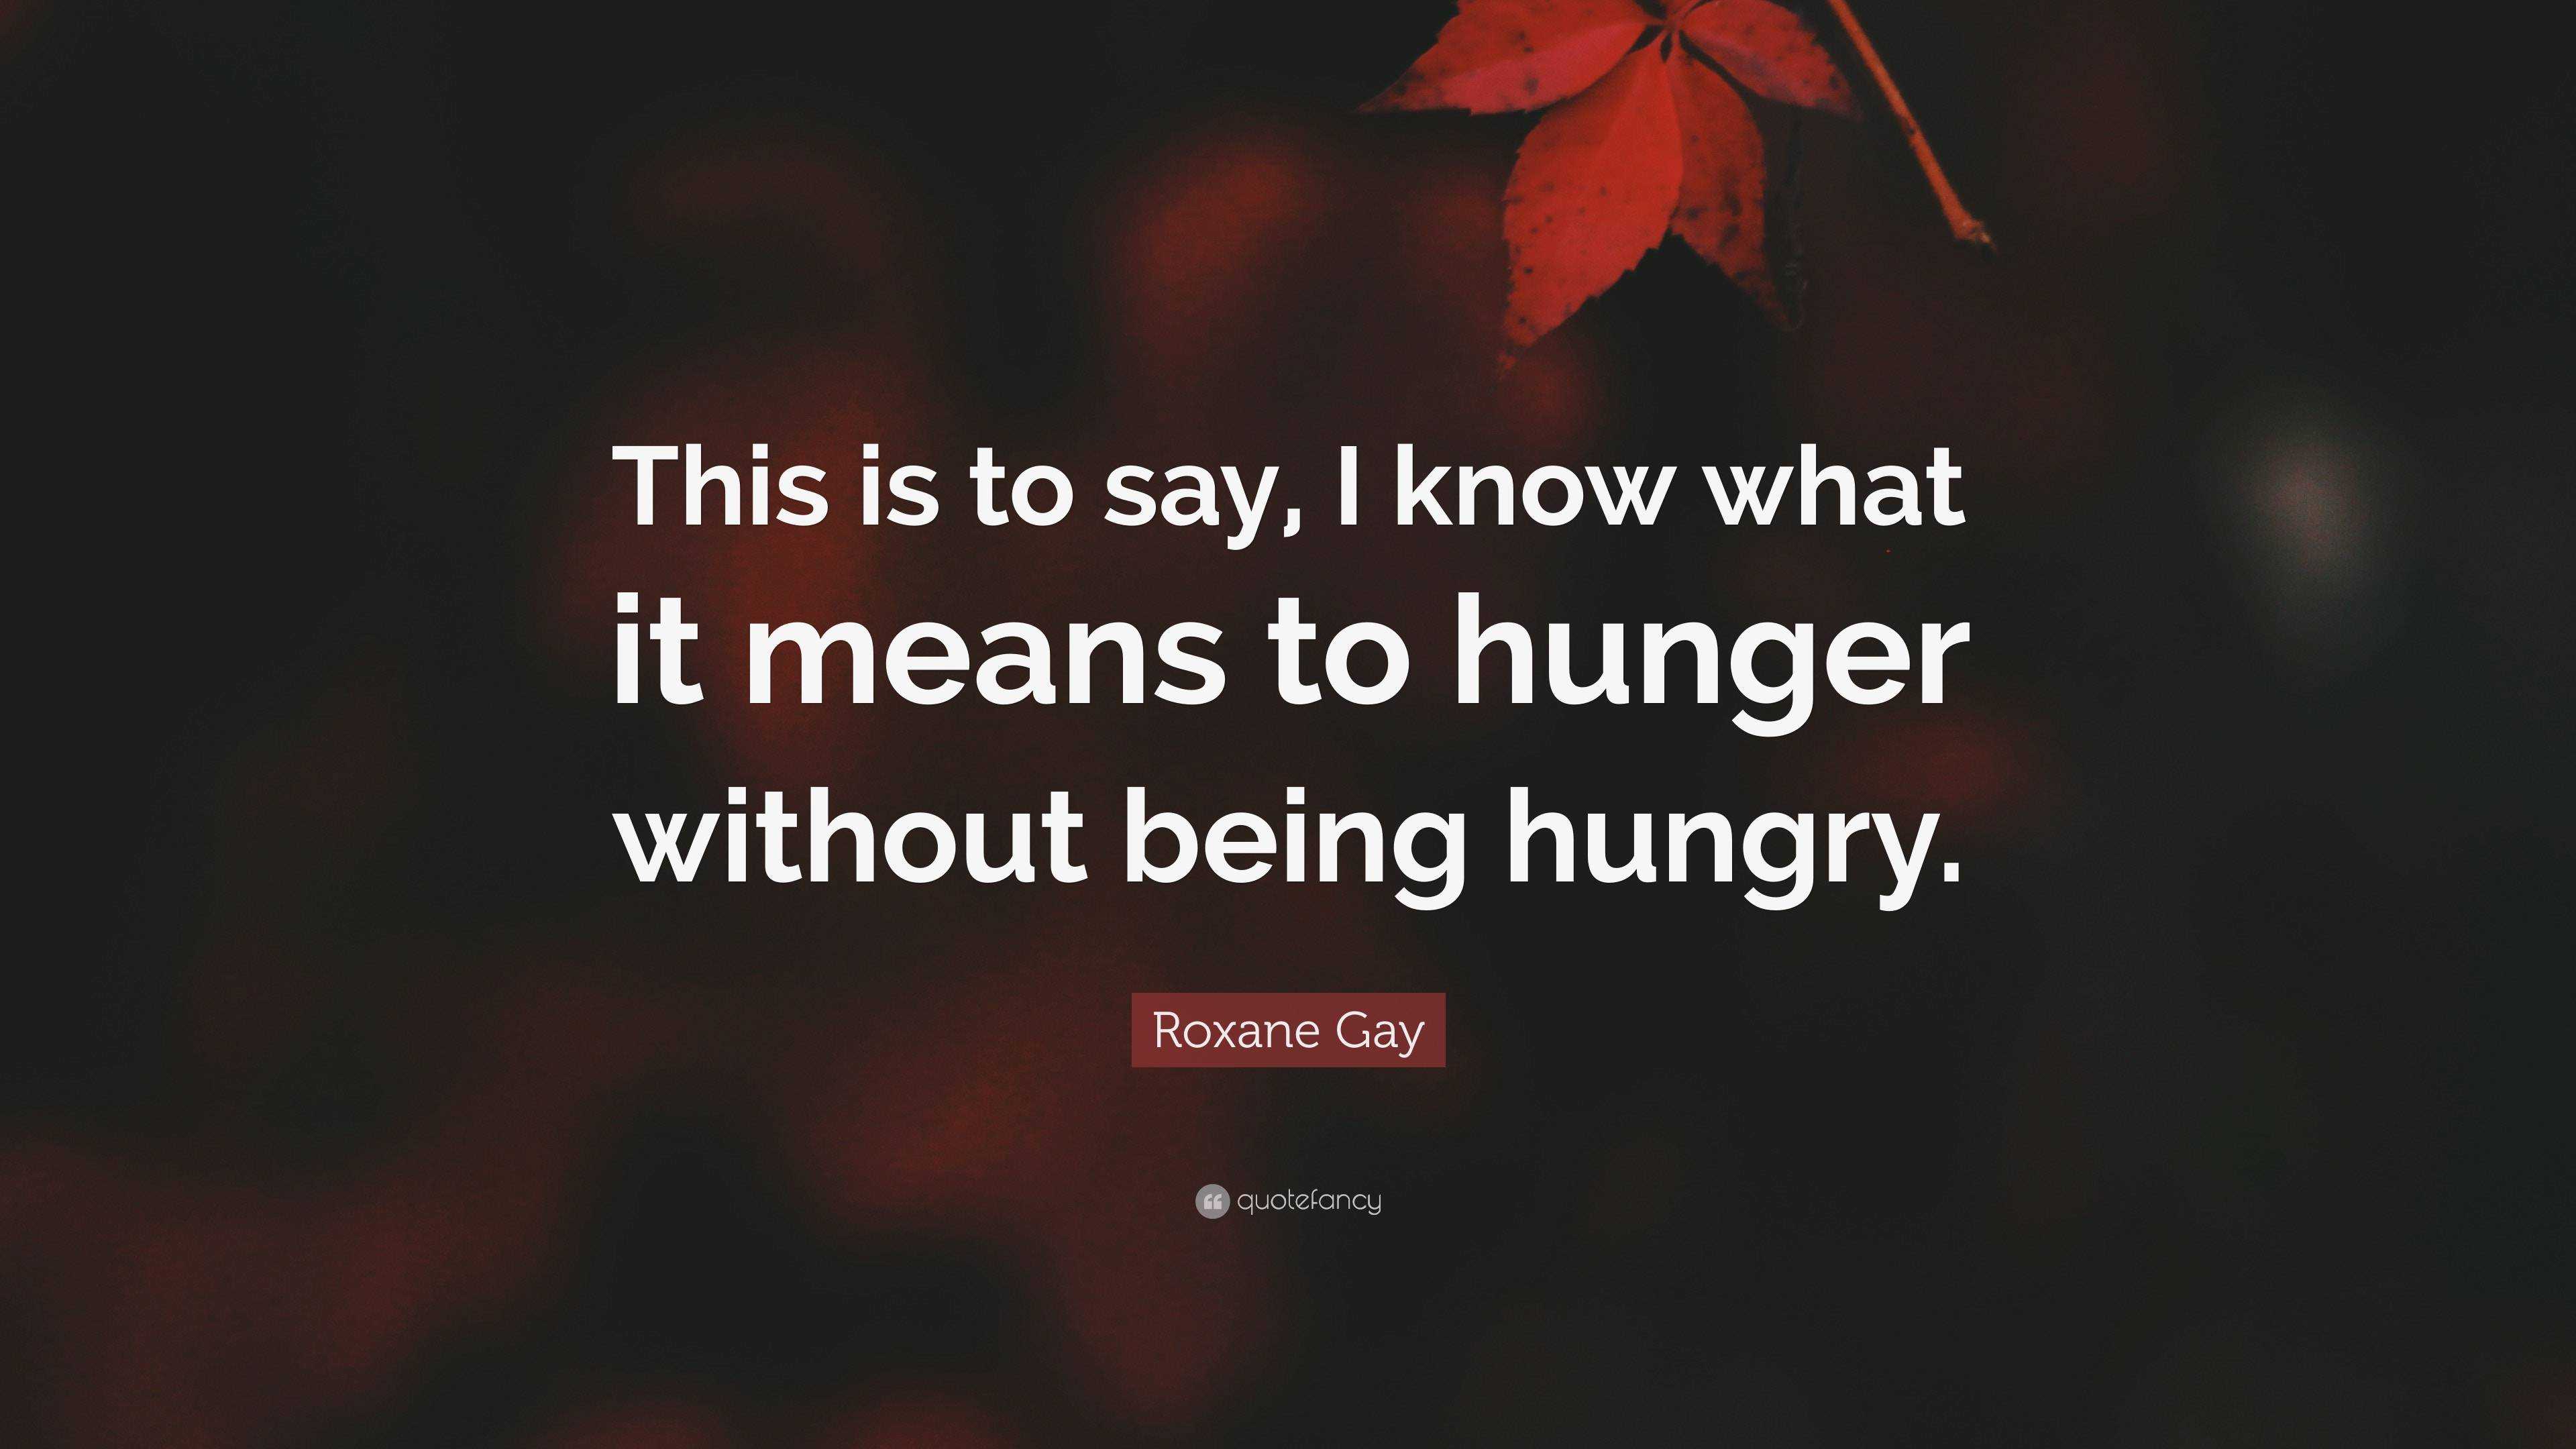 roxane gay quotes from hunger